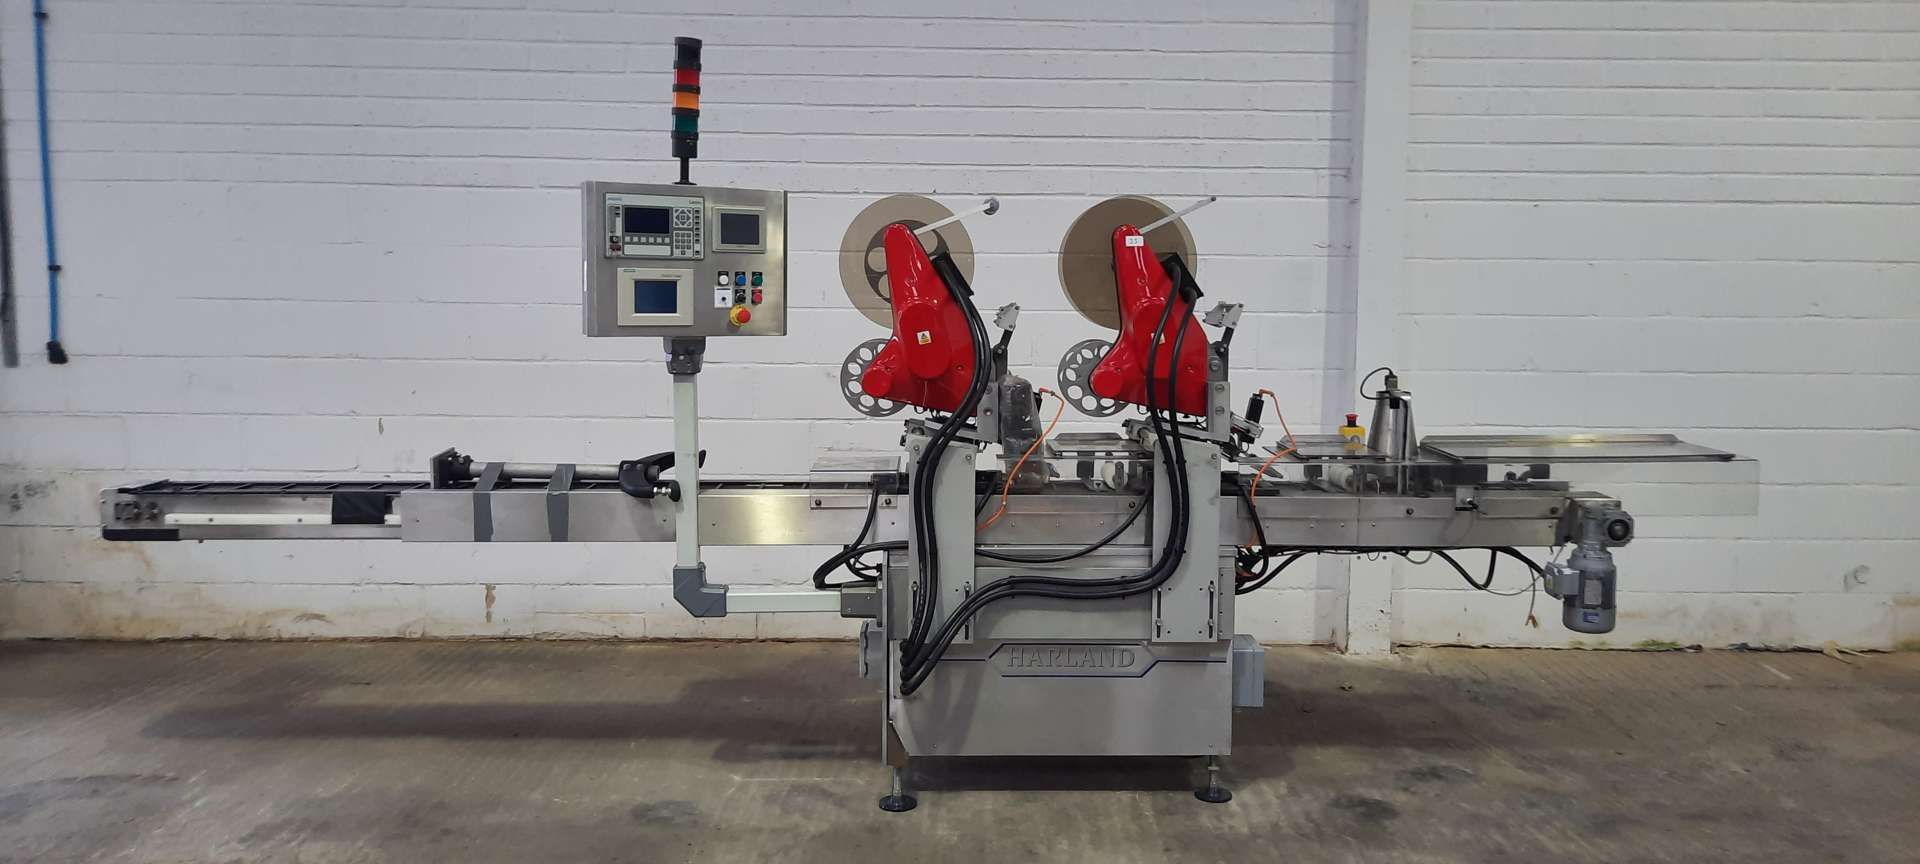 Harland Labeller MK 5 Sirius Automatic 2-Head Top Label Applicator with Comet Heads